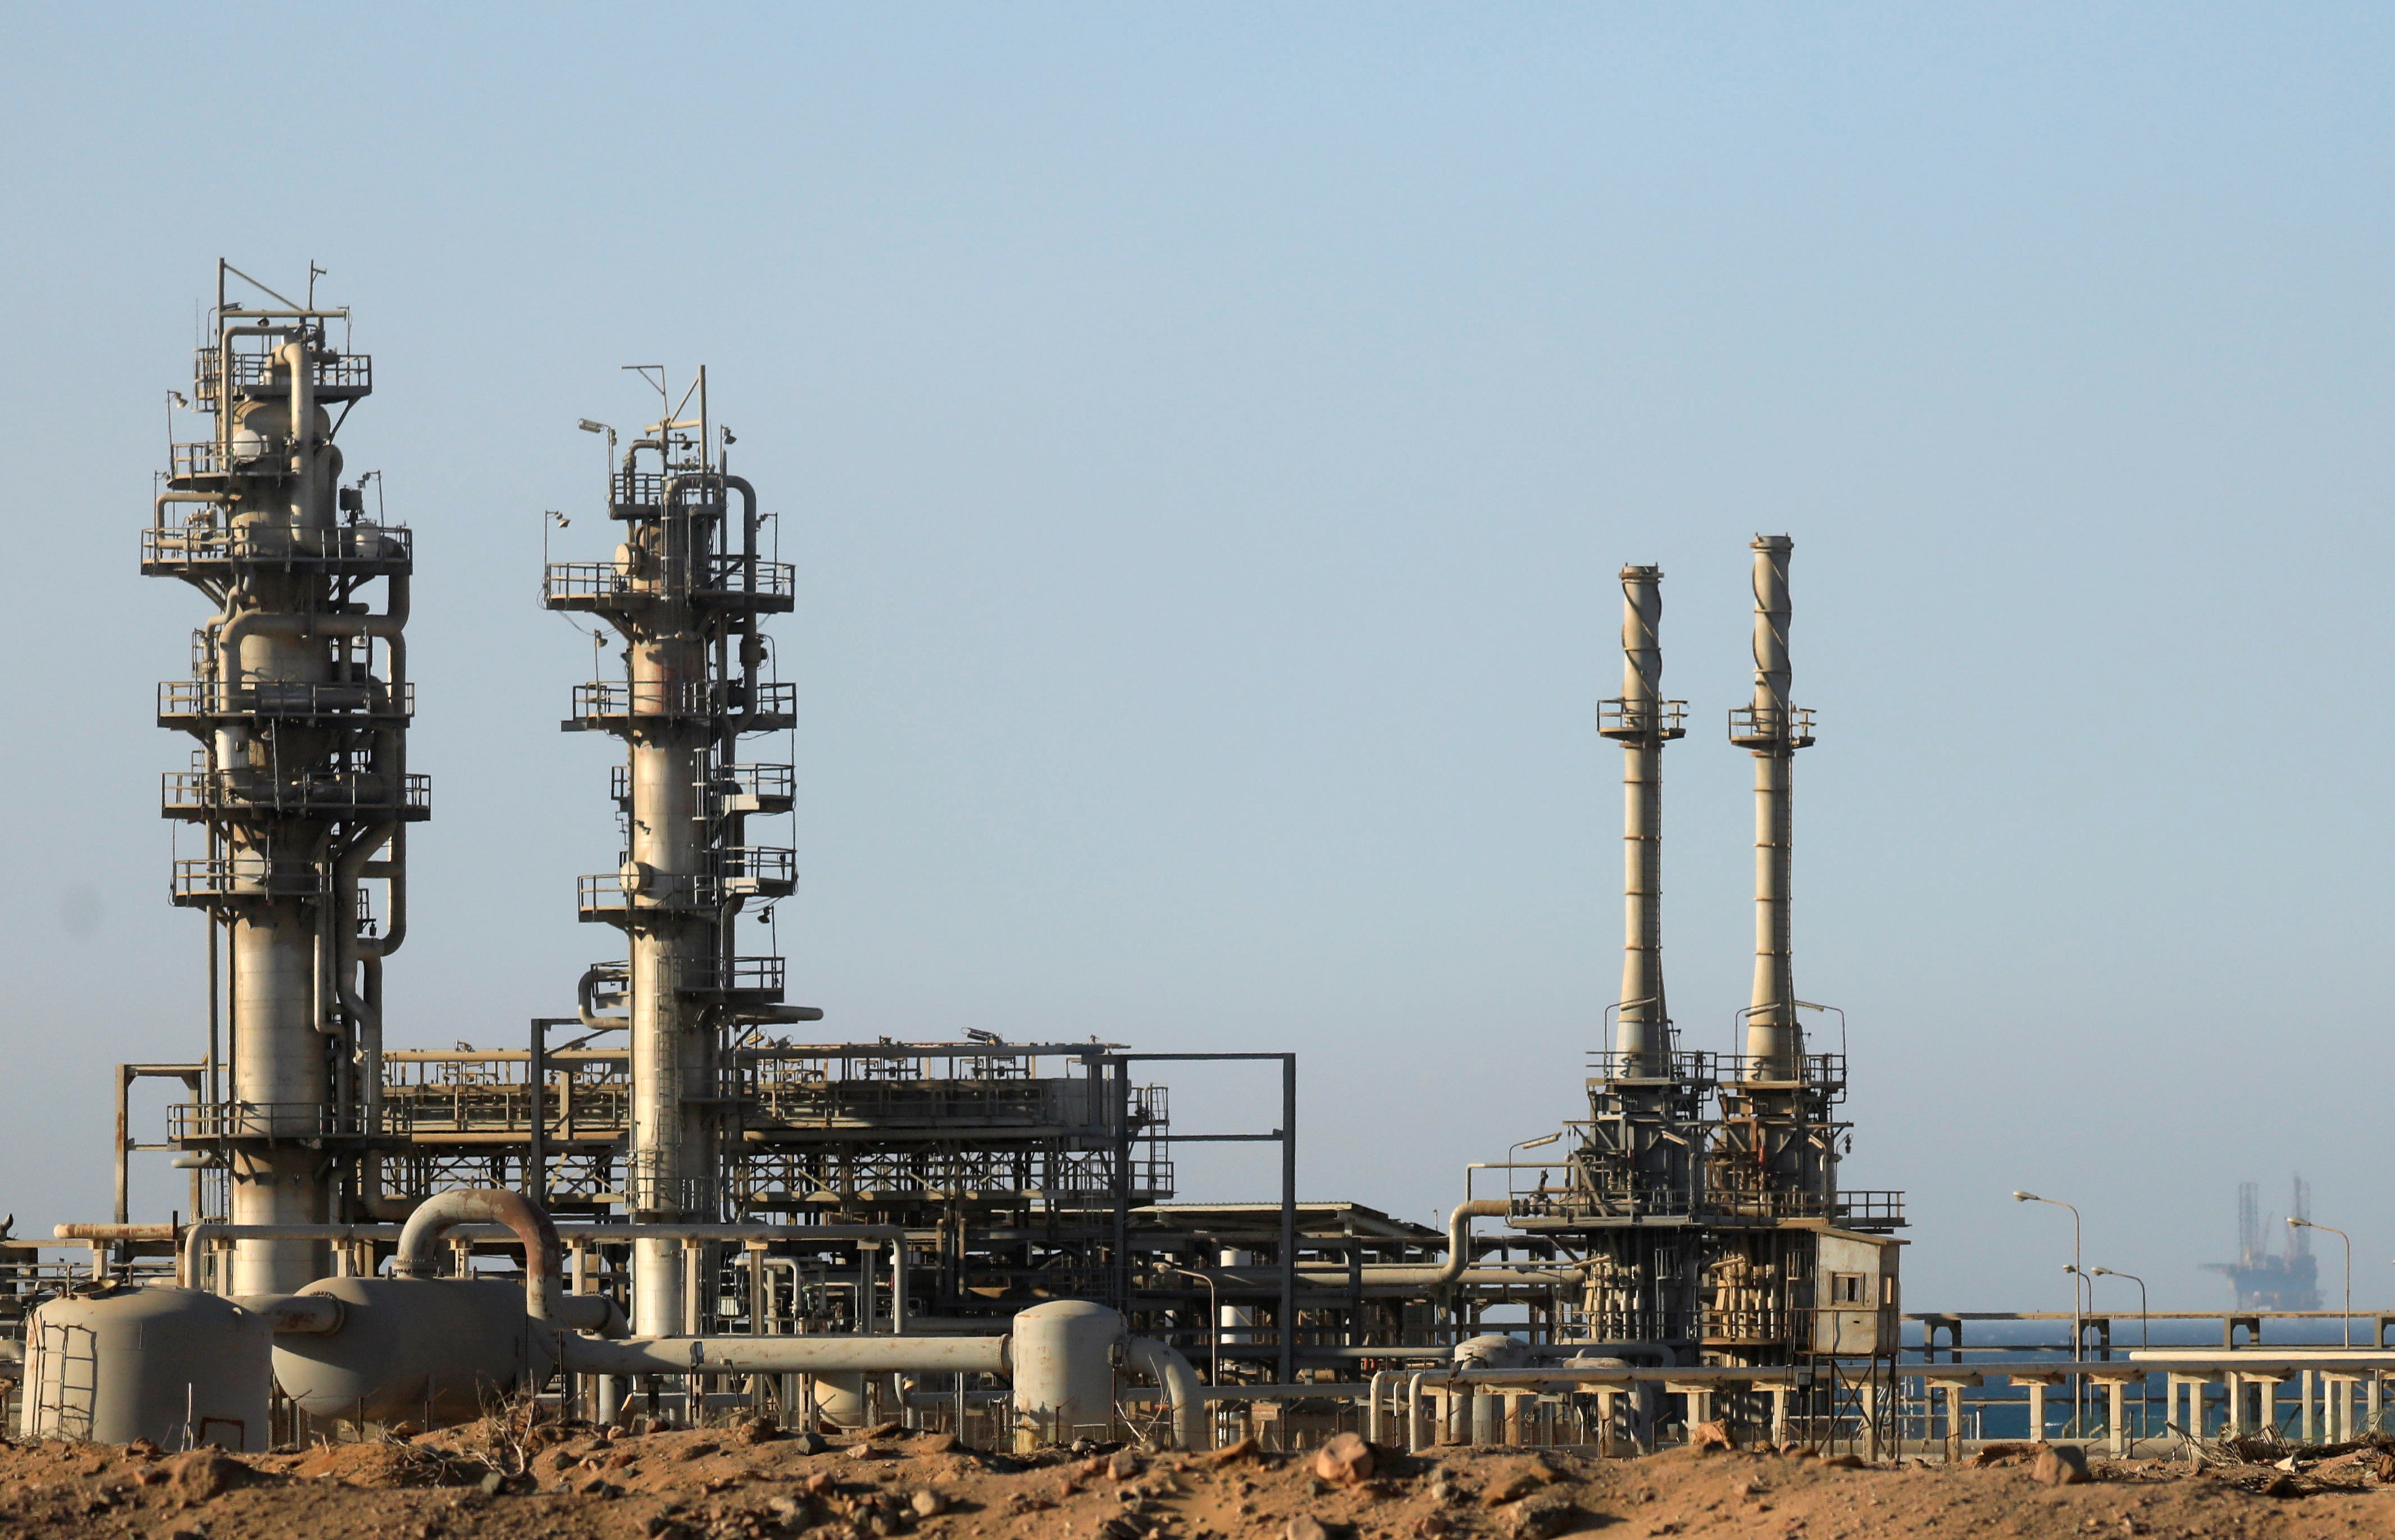 View of a gas plant seen from the desert road of Suez outside Cairo